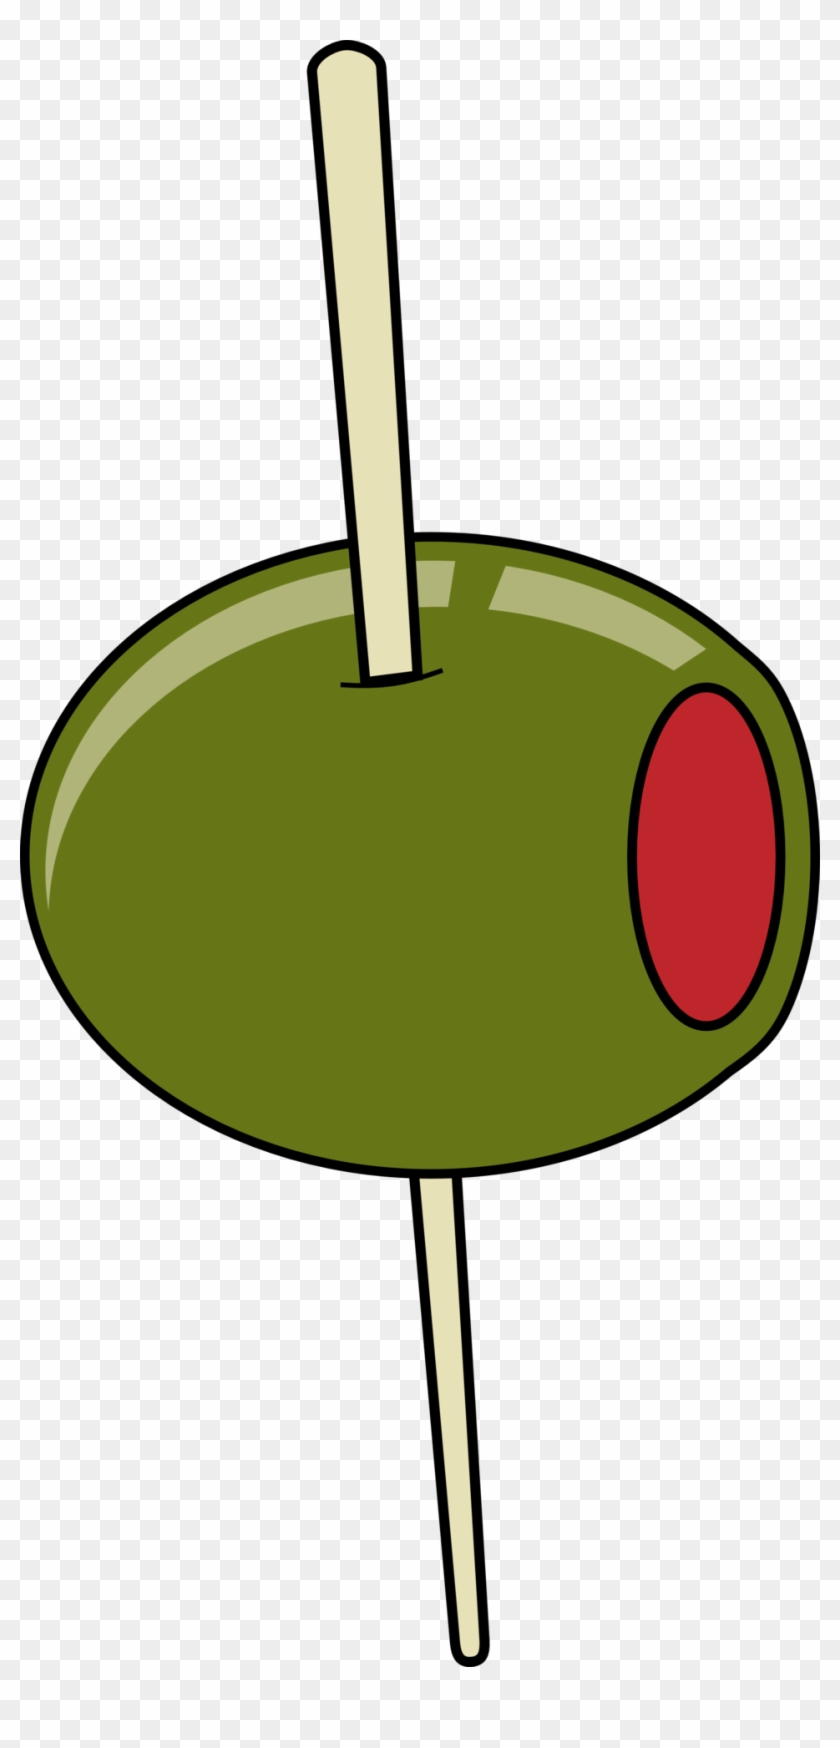 Green Olive On A Toothpick - Olive On A Toothpick Clipart #2076129